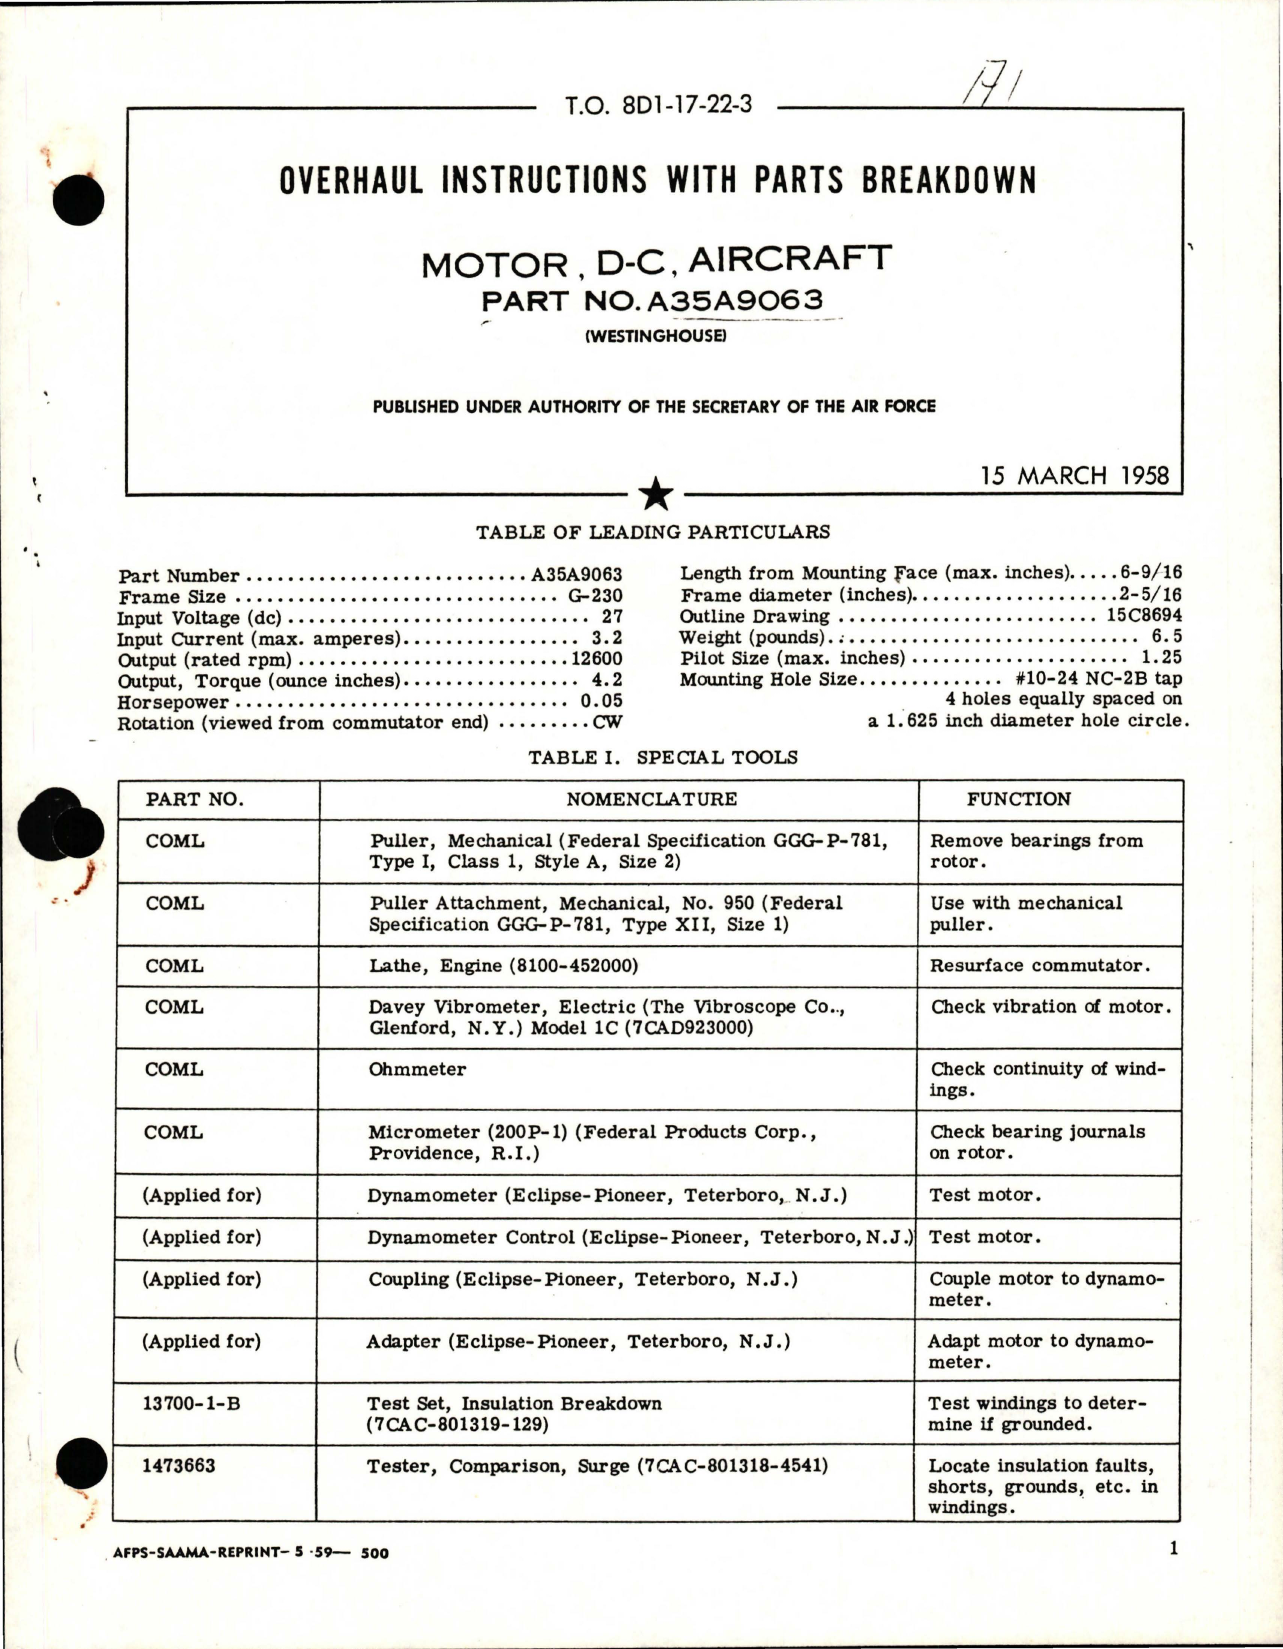 Sample page 1 from AirCorps Library document: Overhaul Instructions with Parts Breakdown for D-C Motor Aircraft - Part A35A9063